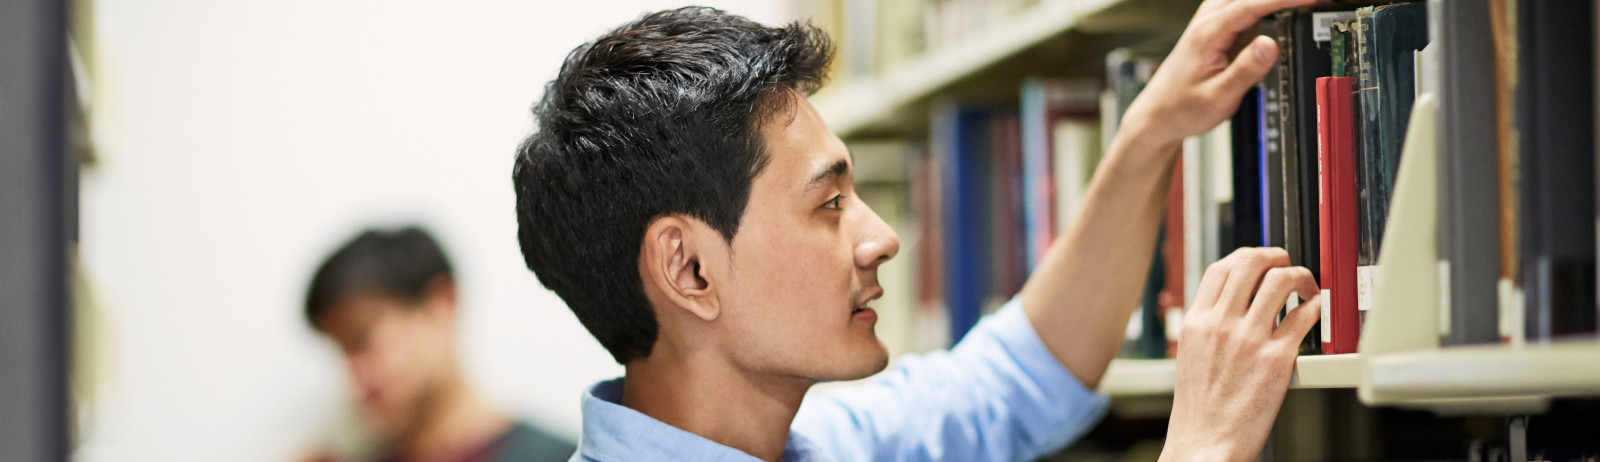 A male IELTS test taker wearing a blue shirt refers to books in a library